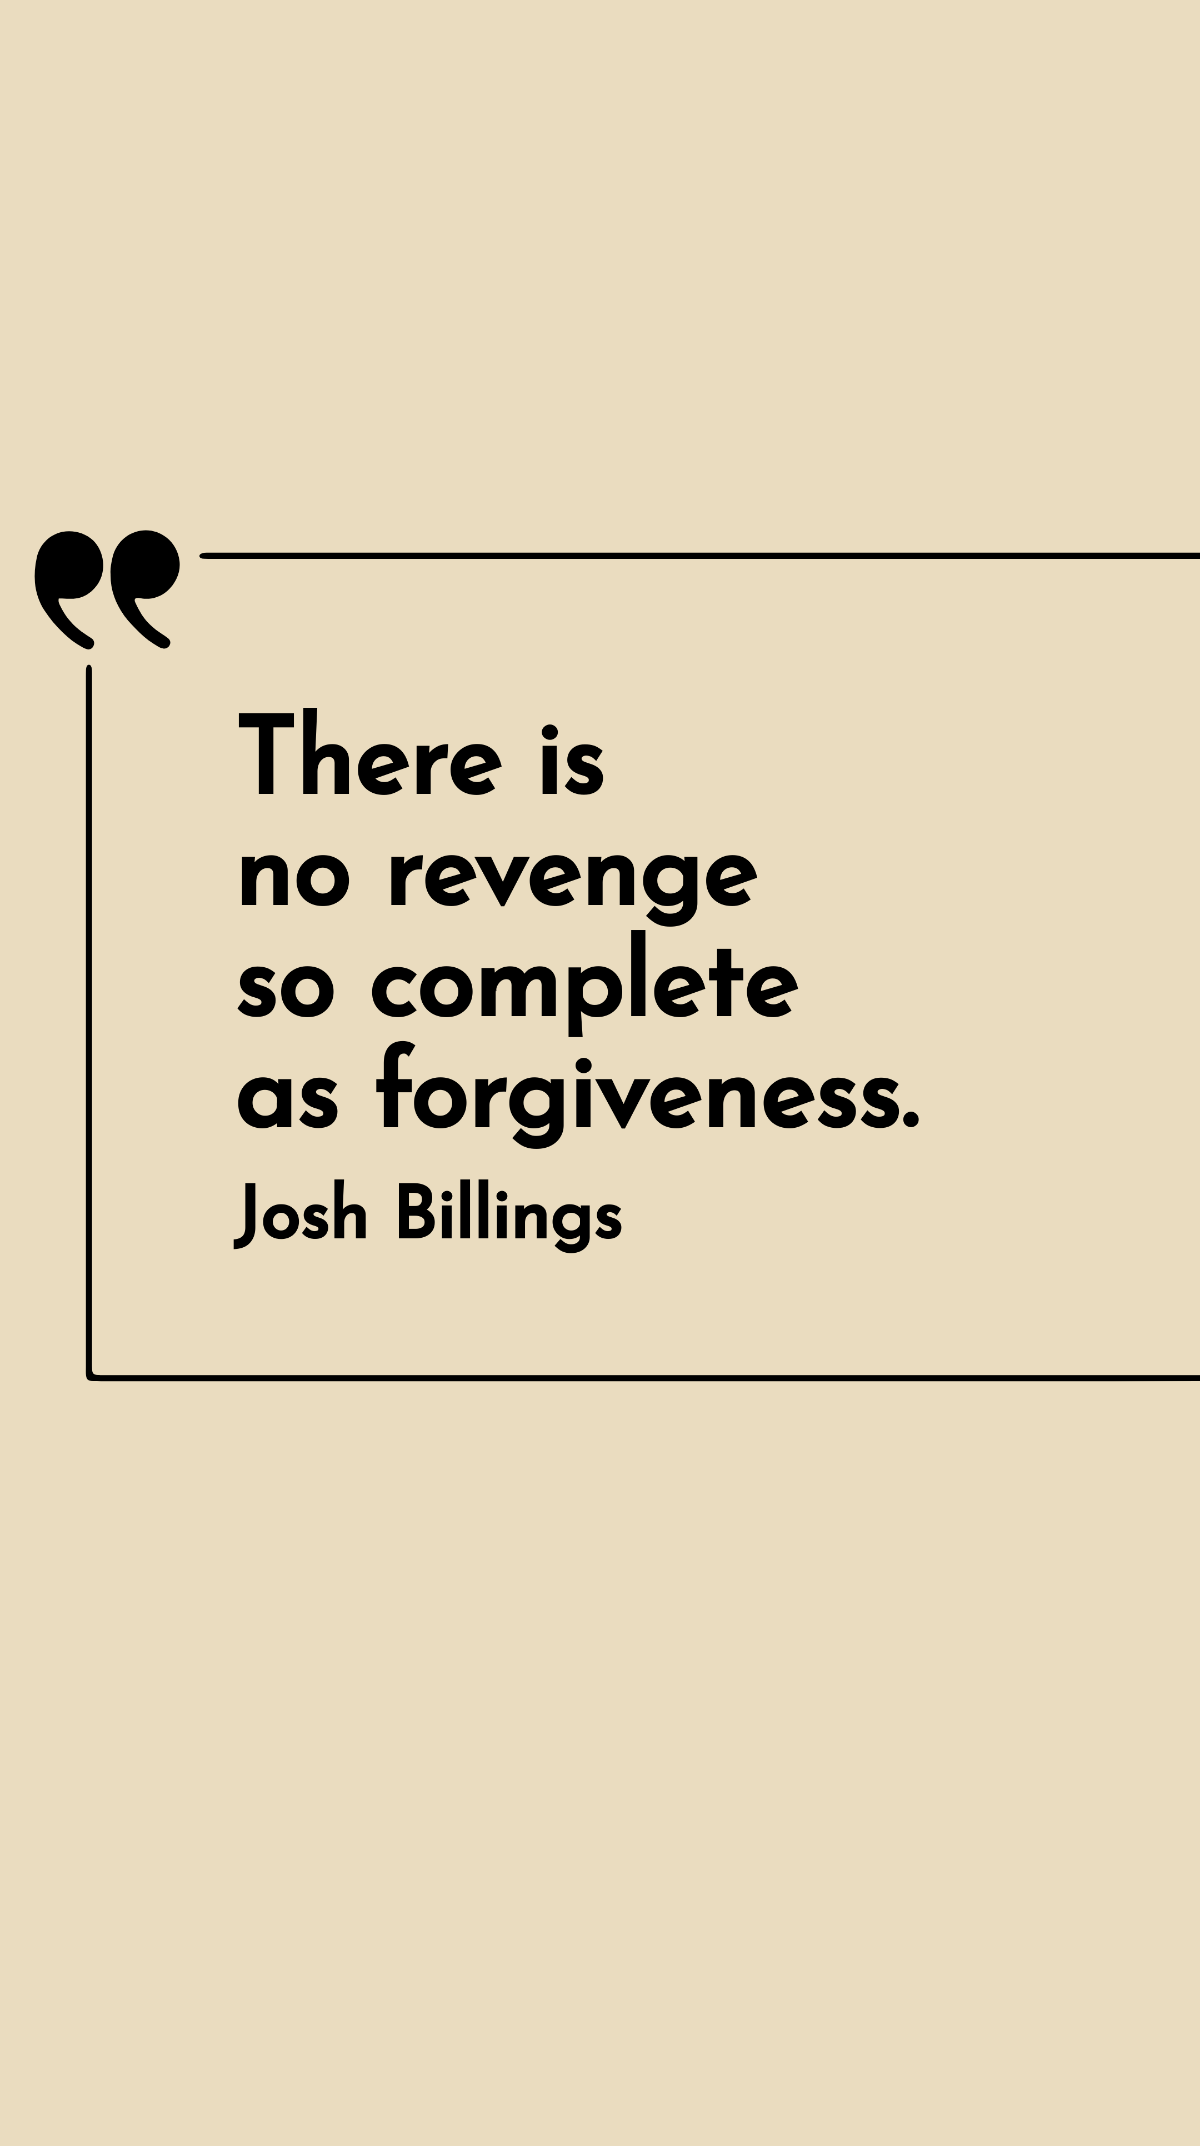 Josh Billings - There is no revenge so complete as forgiveness. Template